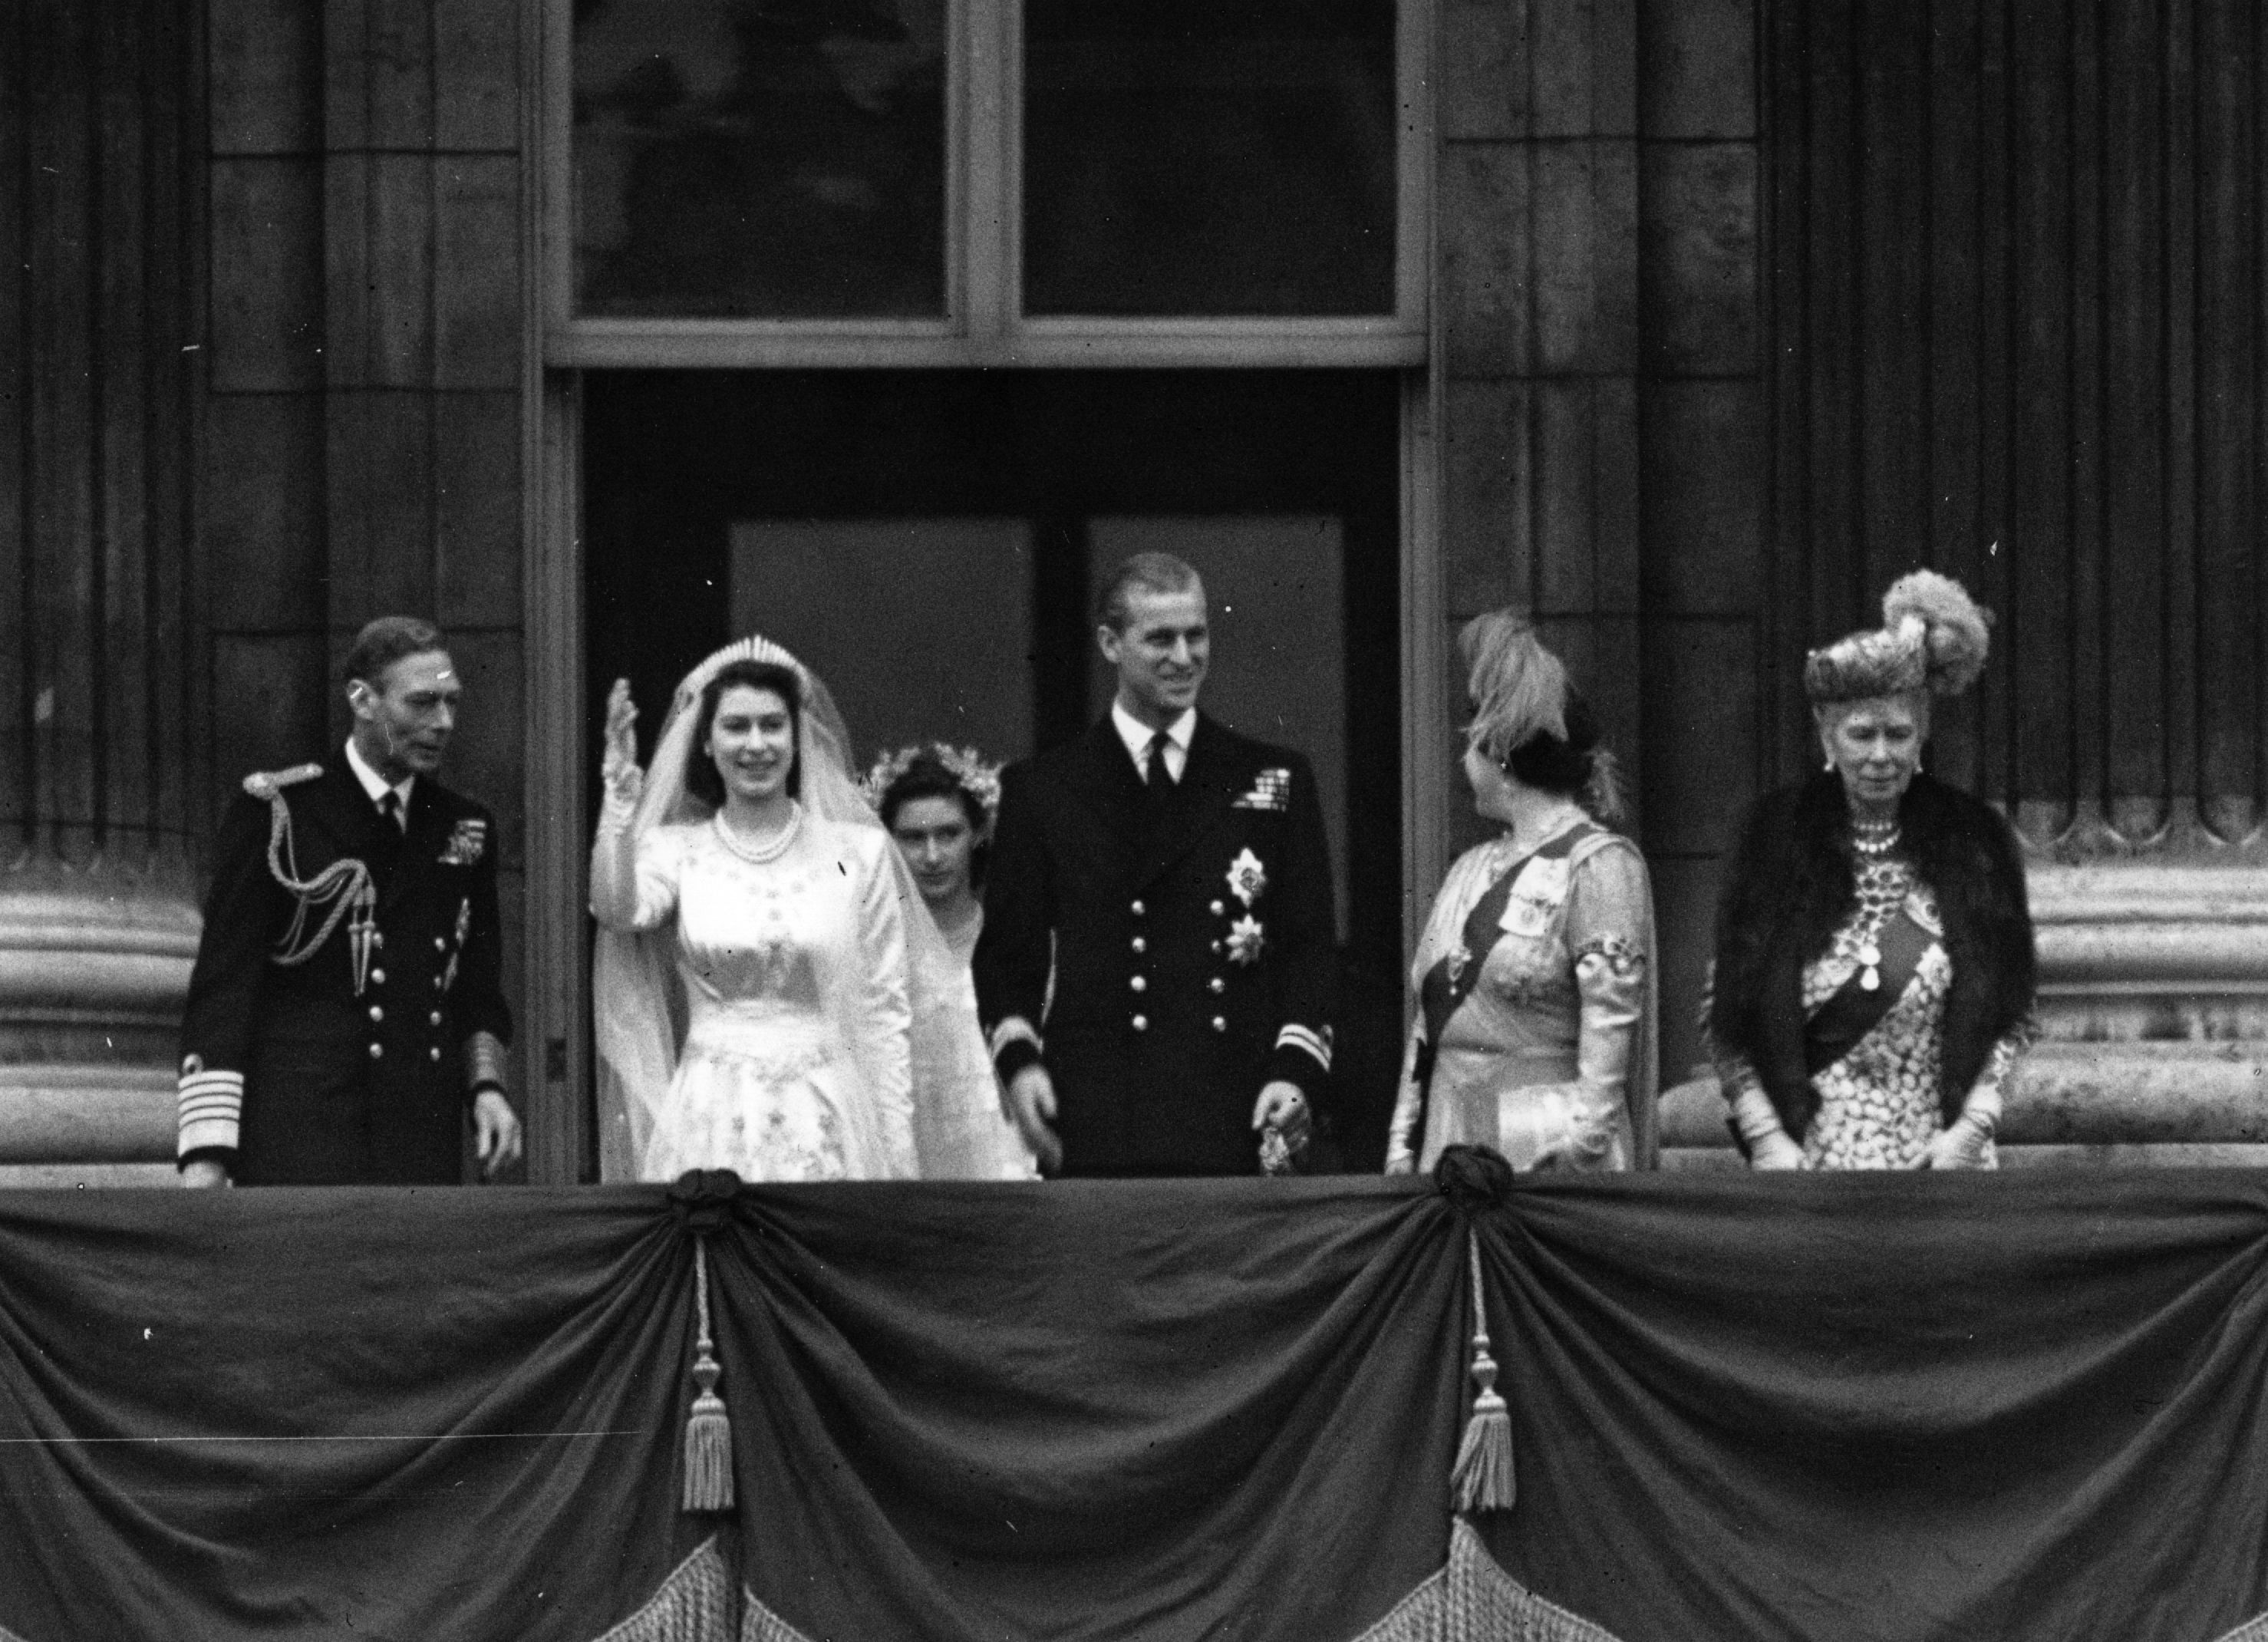 Princess Elizabeth and Philip, Duke of Edinburgh on the balcony of Buckingham Palace after their wedding with King George VI, the Queen Mother, and Queen Mary